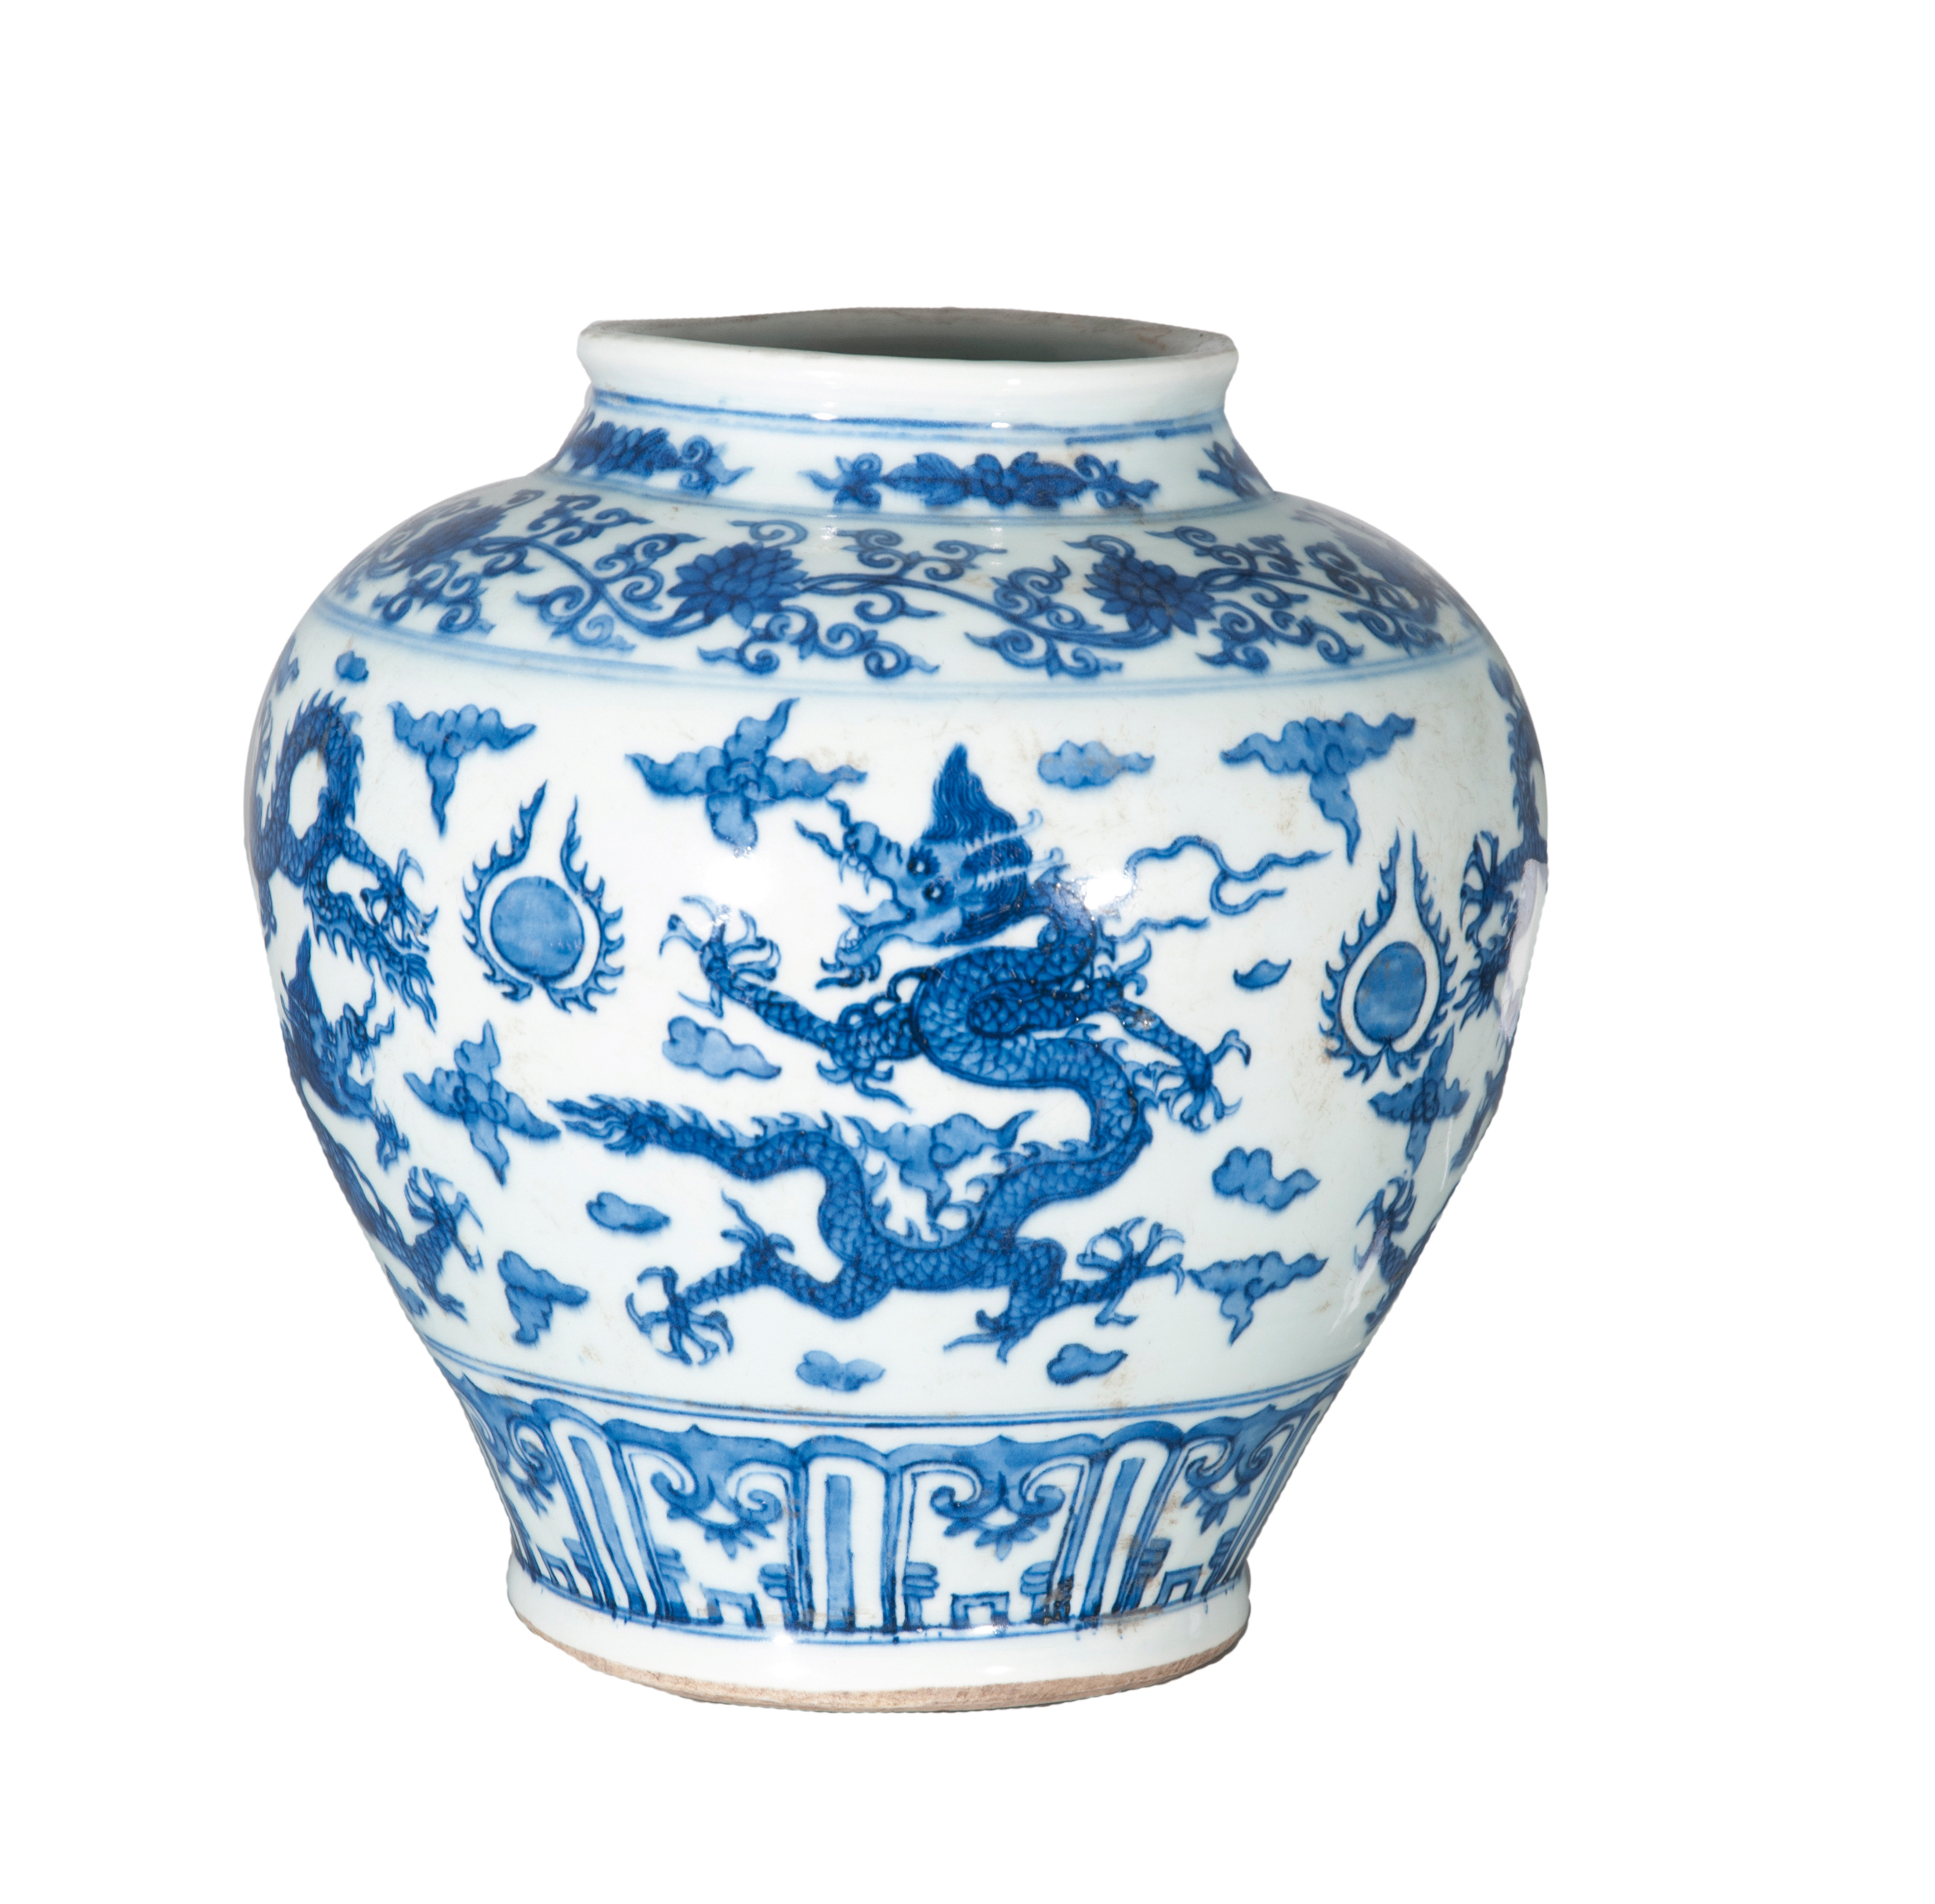 A Ming-style jar with dragons